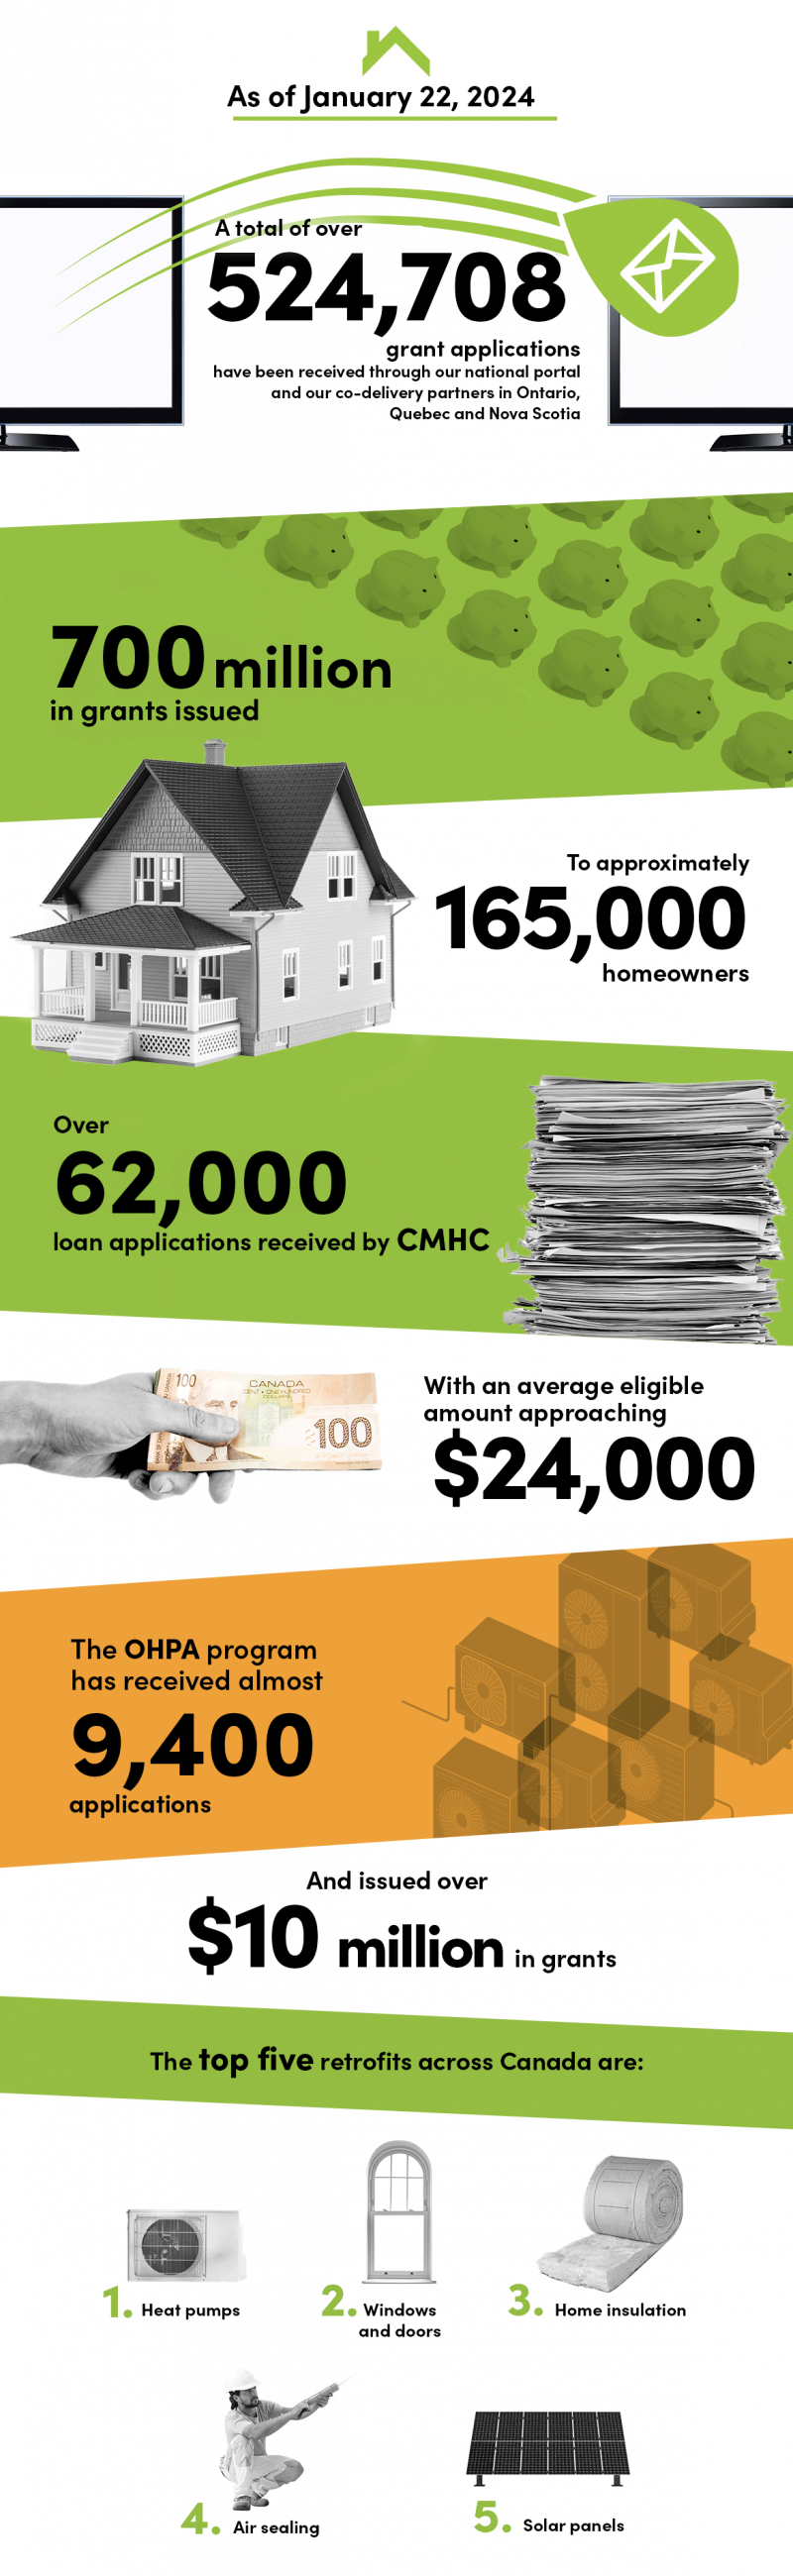 As of January 22, 2024 A total of over 524,708 grant applications have been received through the national portal and our co-delivery partners in Ontario, Quebec and Nova Scotia. $700 million in grants issued to approximately 165,000 homeowners. Over 62,000 loan applications received by Canada Mortgage and Housing Corporation (CMHC) with an average eligible amount of over $24,000. The Oil to Heat Pump Affordability (OHPA) program has received almost 9,400 applications and issued over $10 million in grants. The top five retrofits across Canada are: 1. heat pumps 2. windows and doors 3. home insulation 4. air sealing 5. solar panels